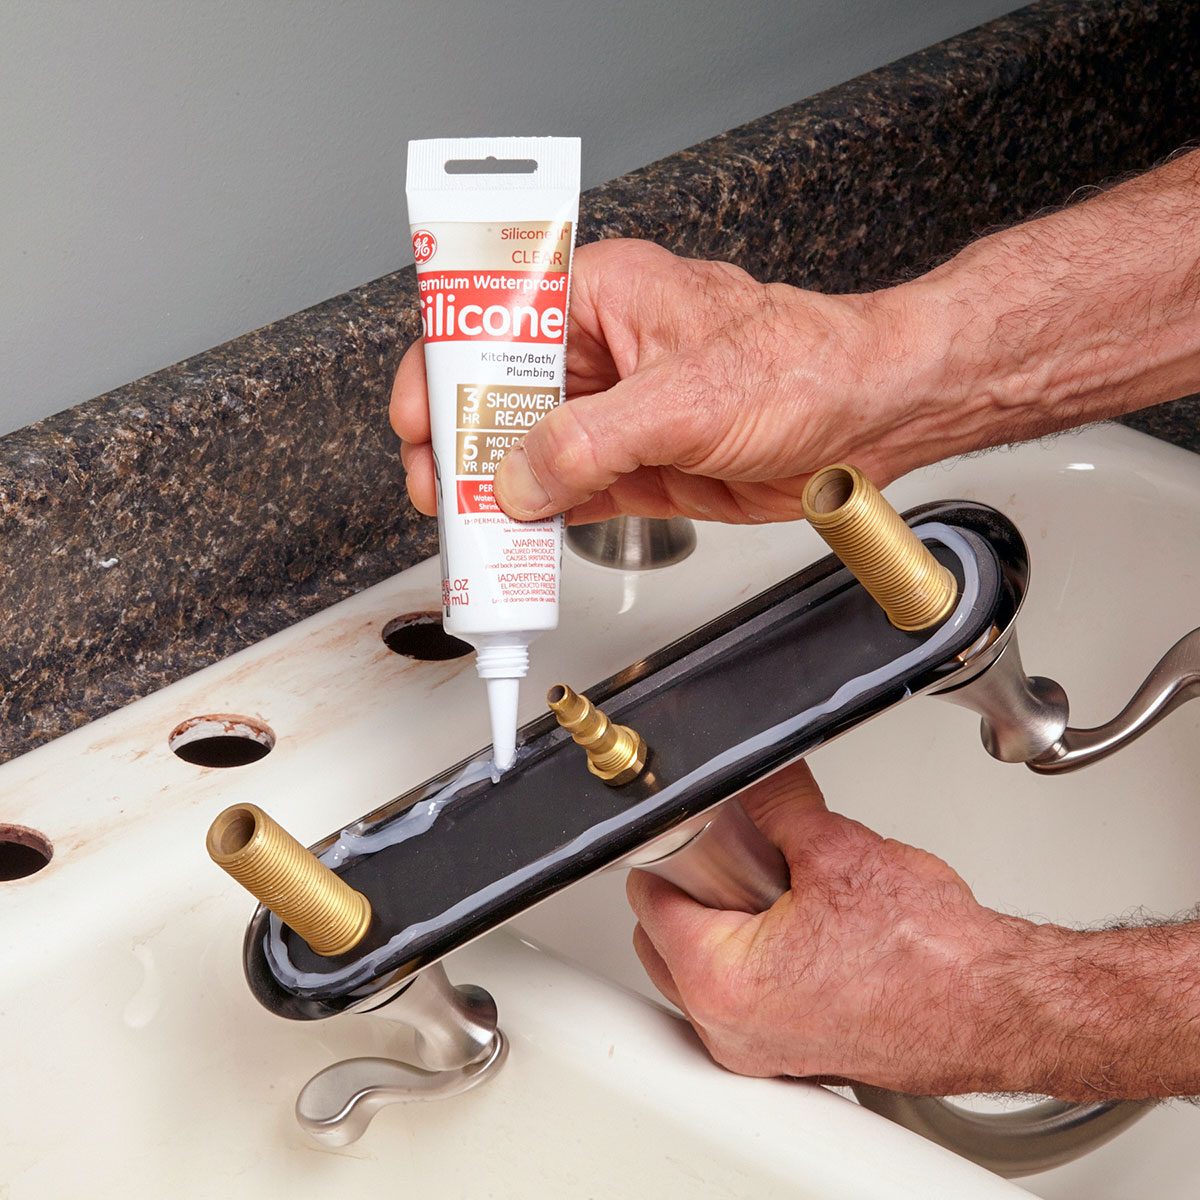 Applying silicon on faucet base